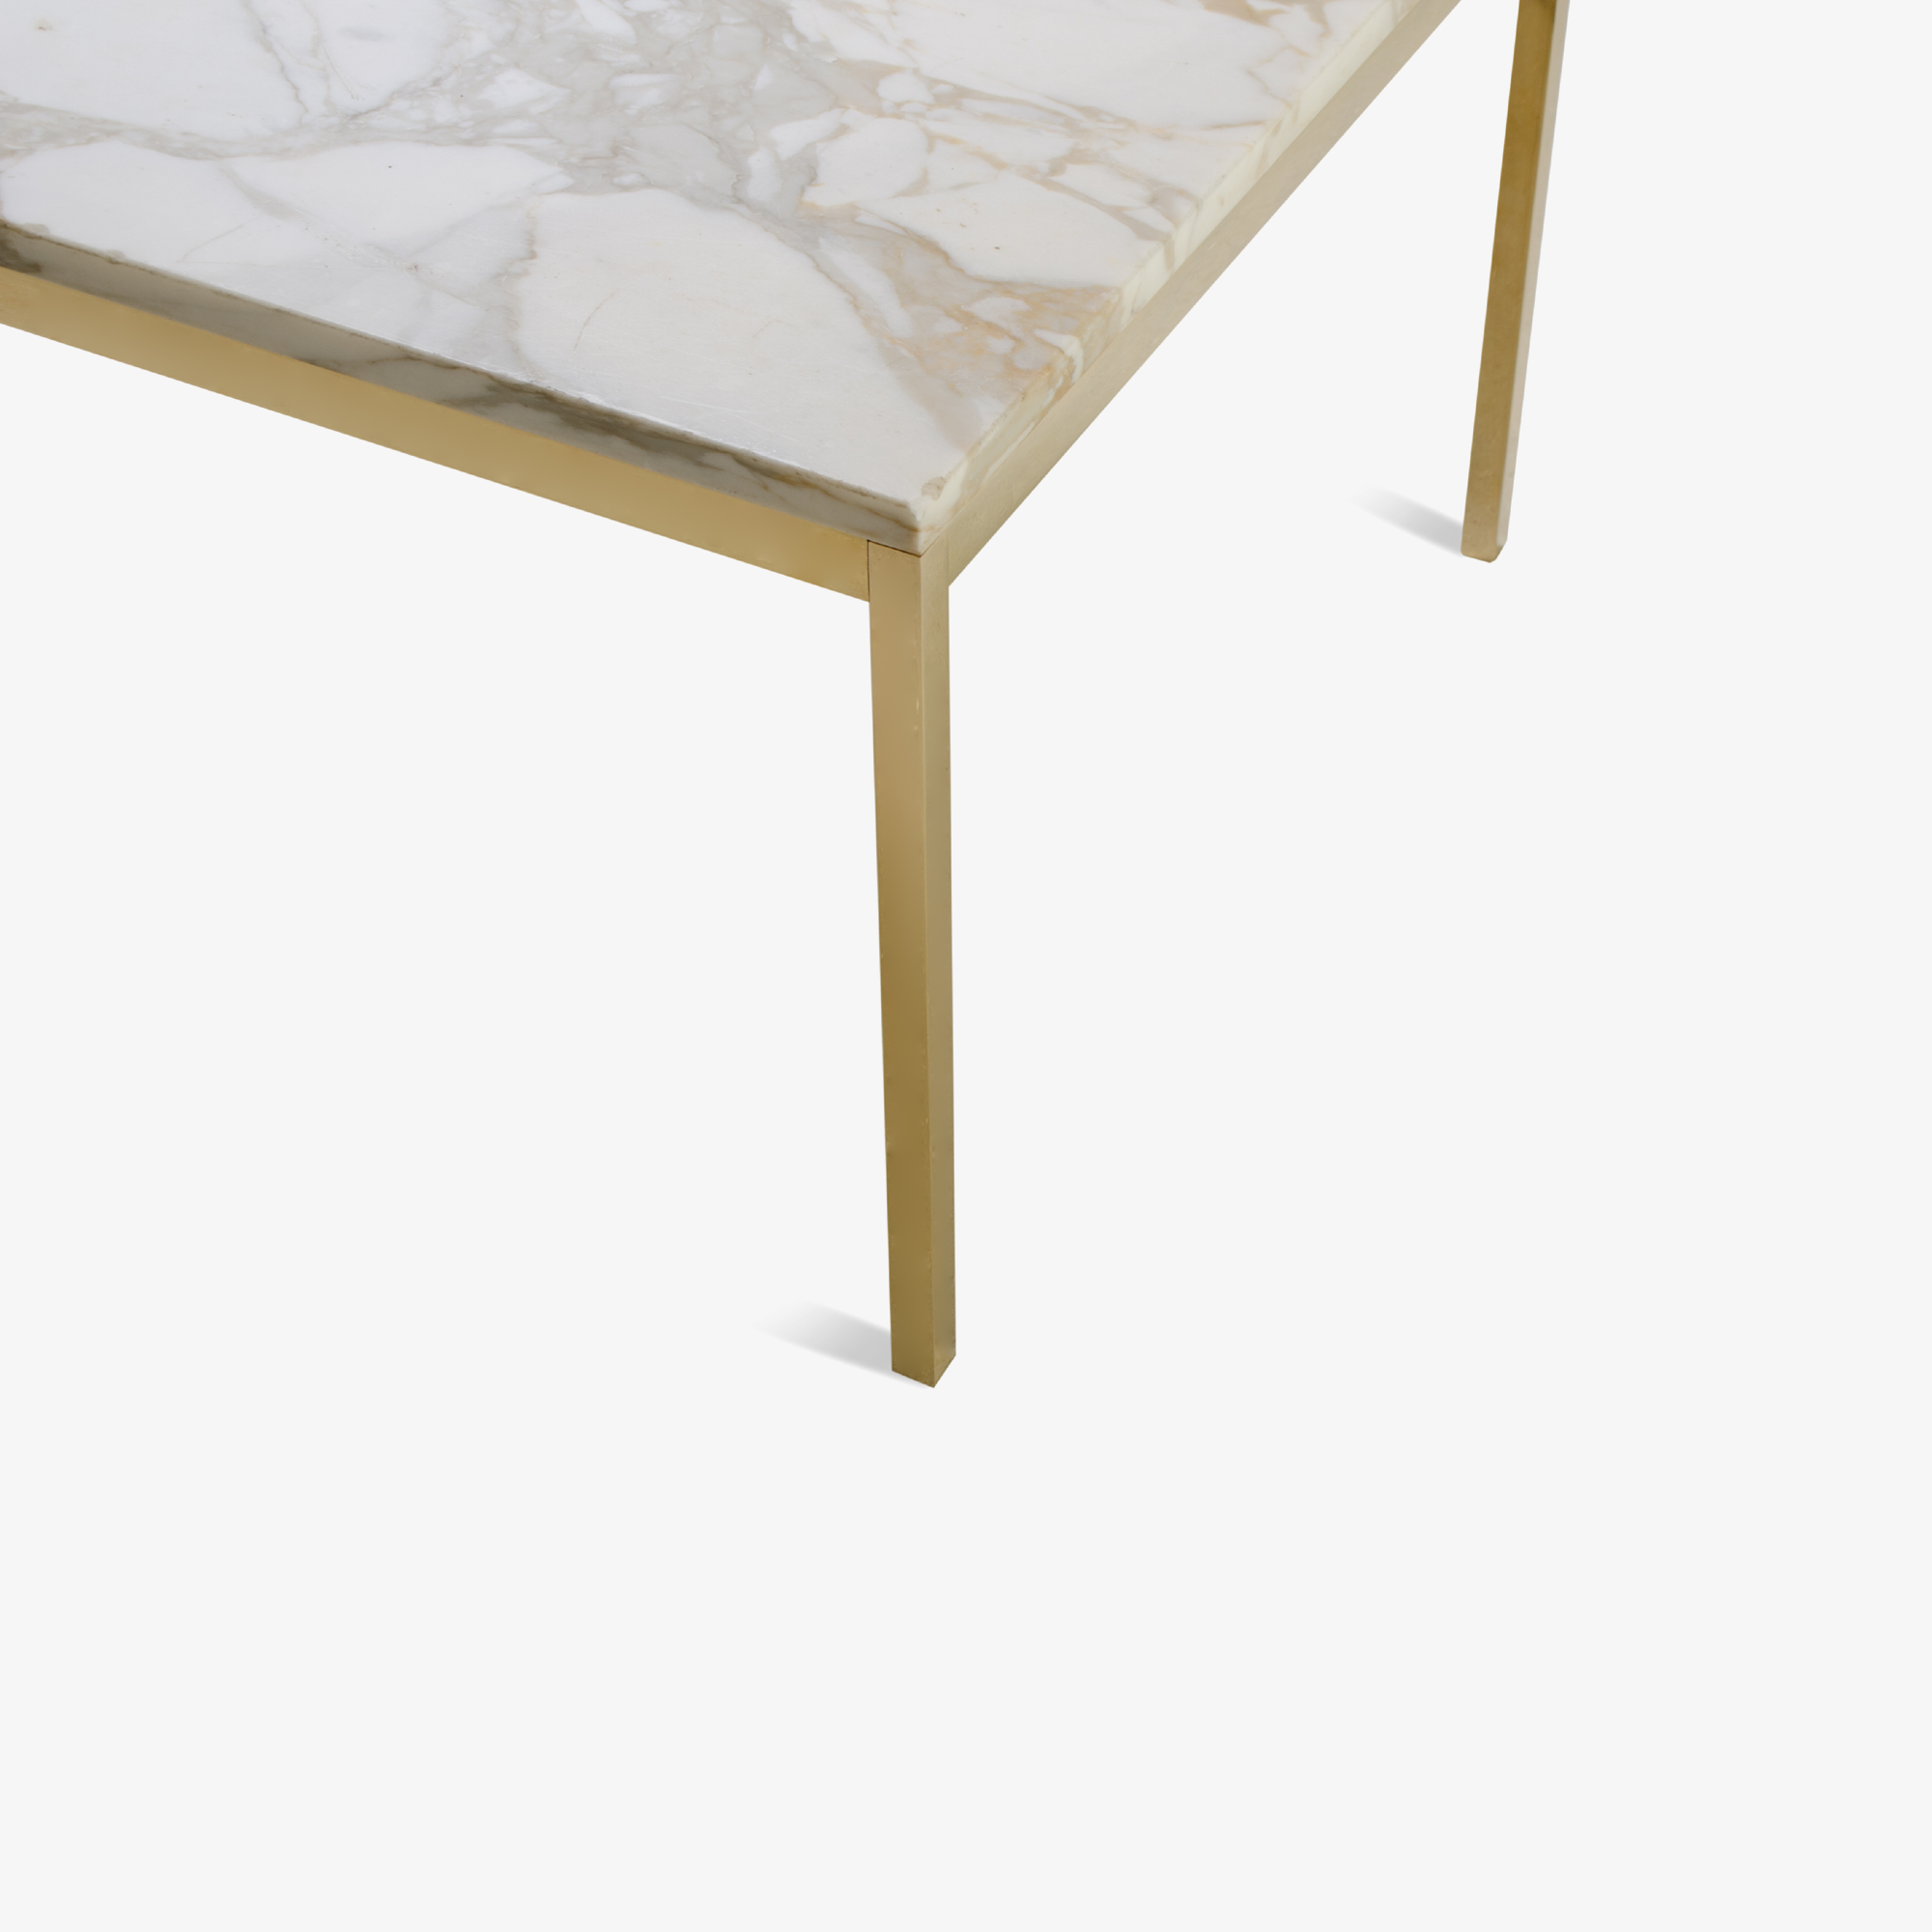 Florence Knoll Coffee Table with Calacatta Marble, 24k Gold Edition3.png